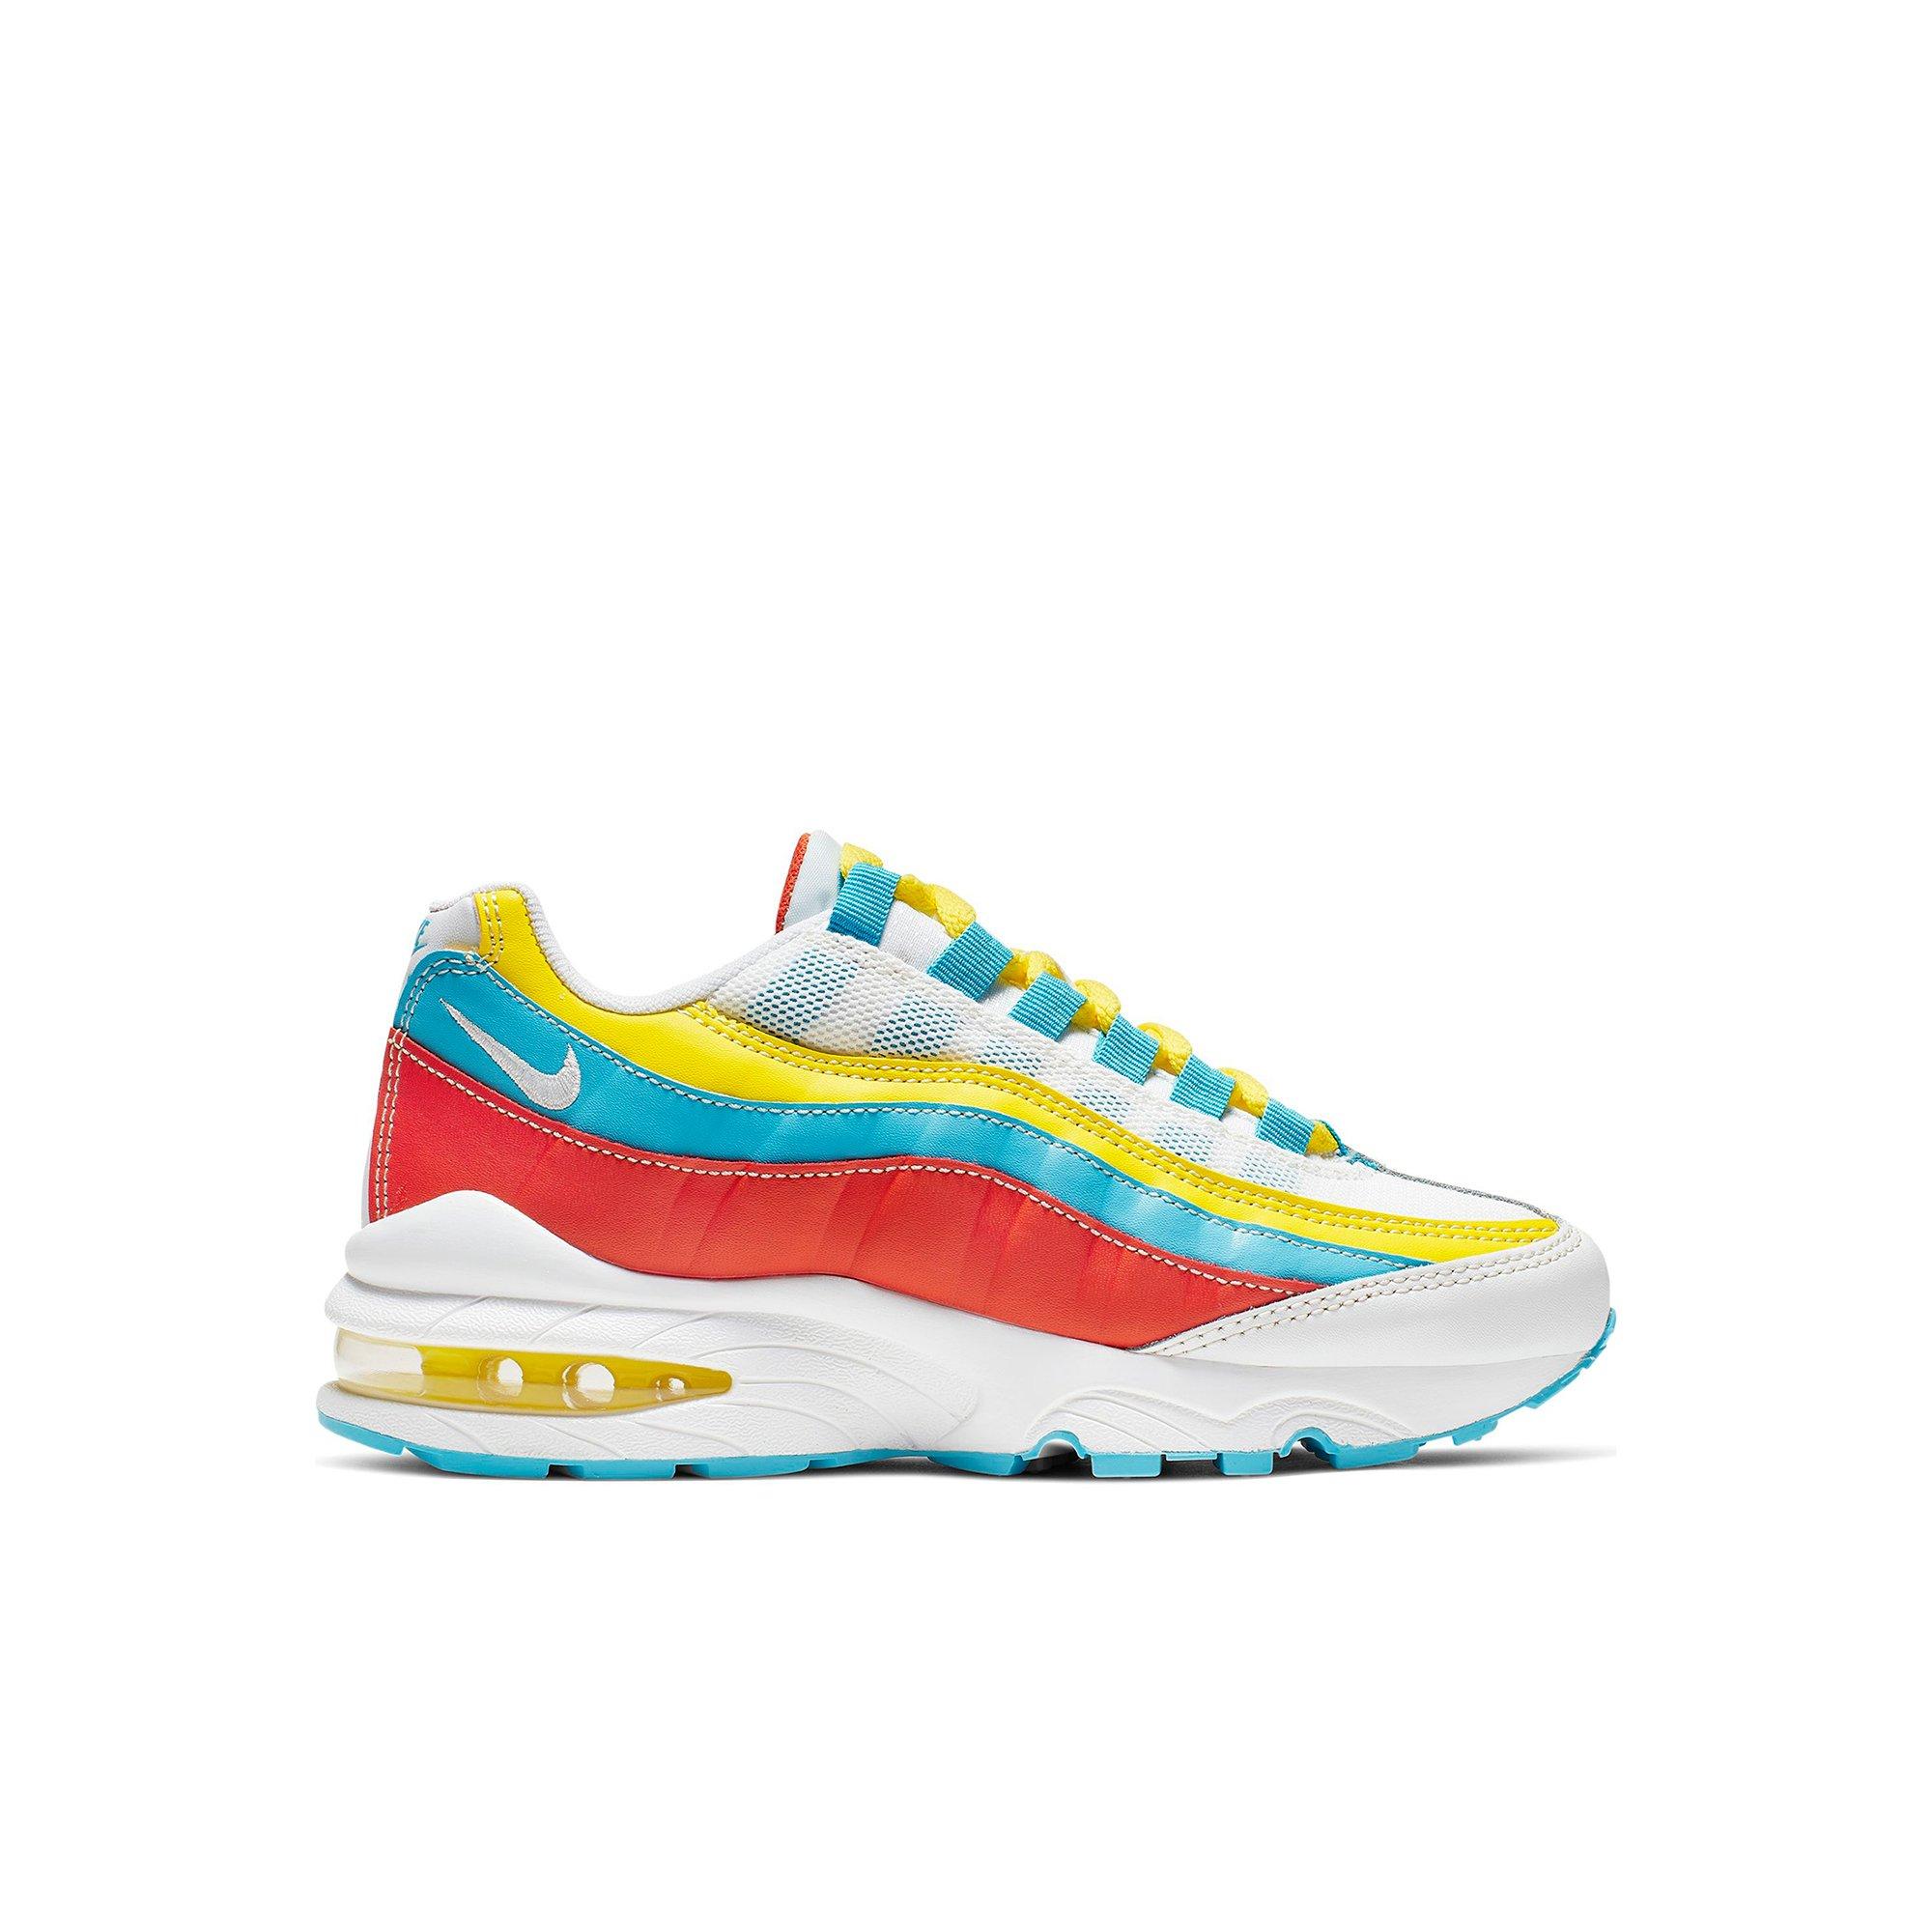 air max 95 white and yellow